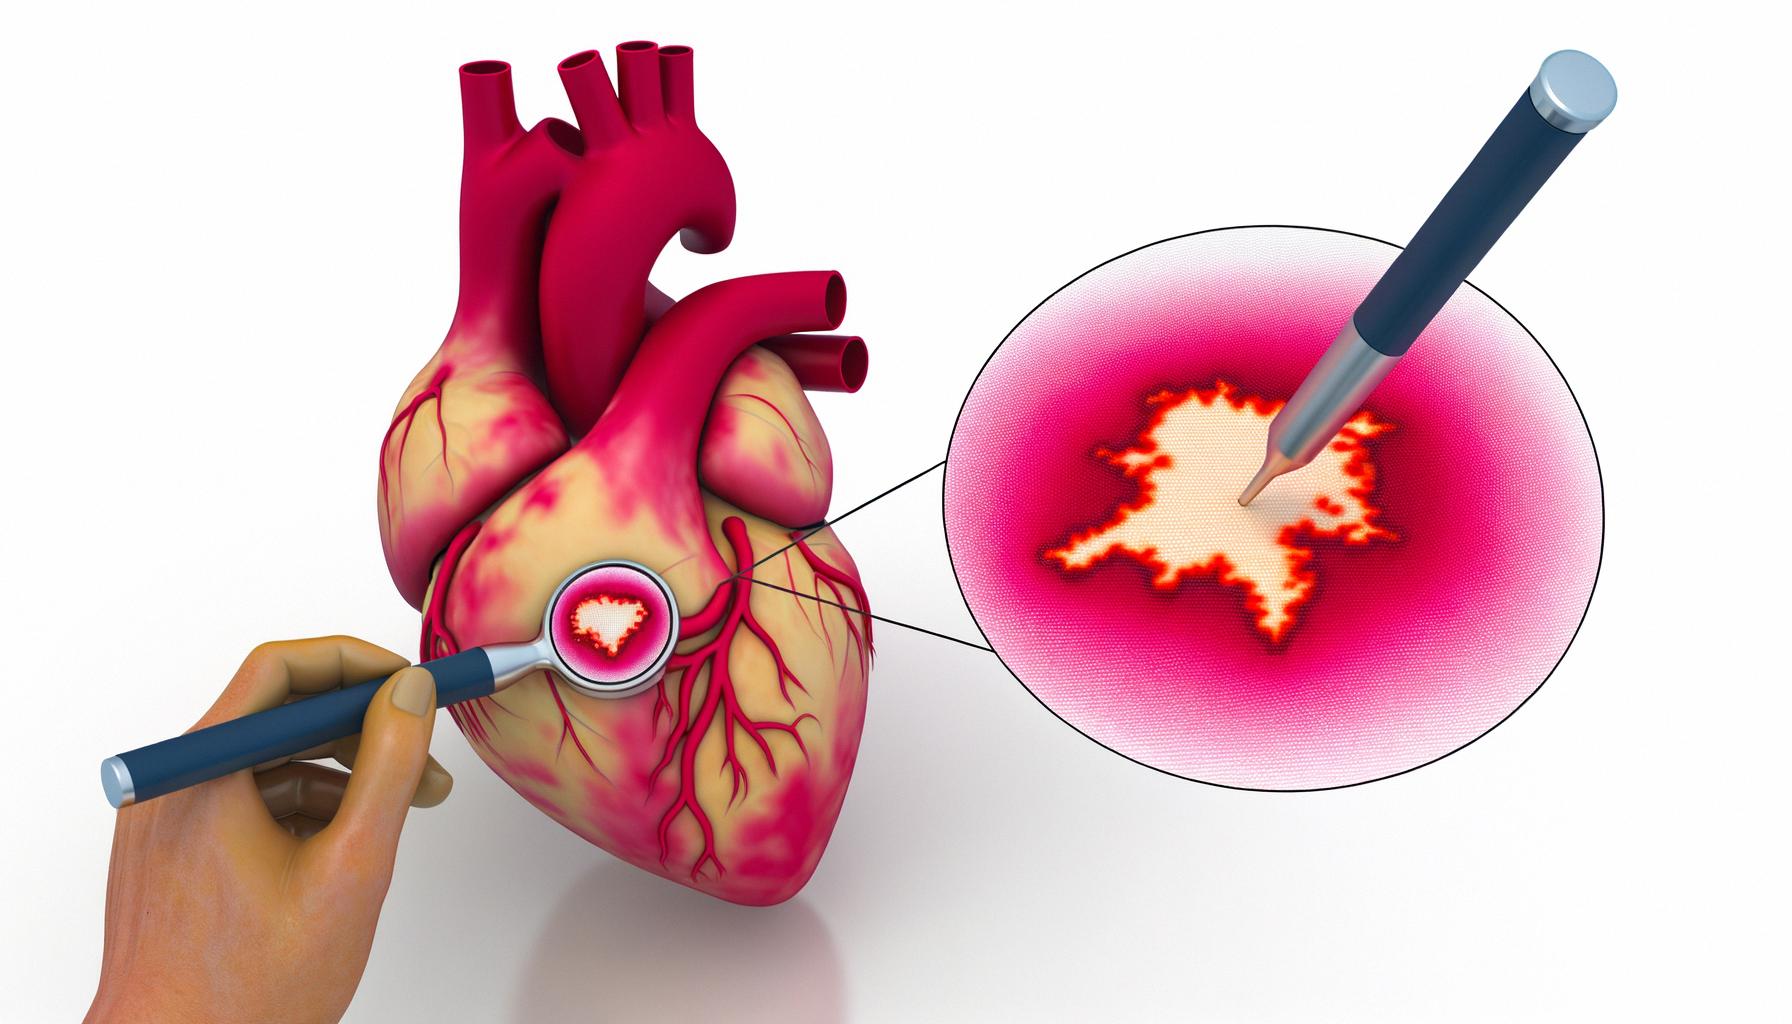 Mapping cardiac fibrosis offers breakthroughs in heart disease treatment.